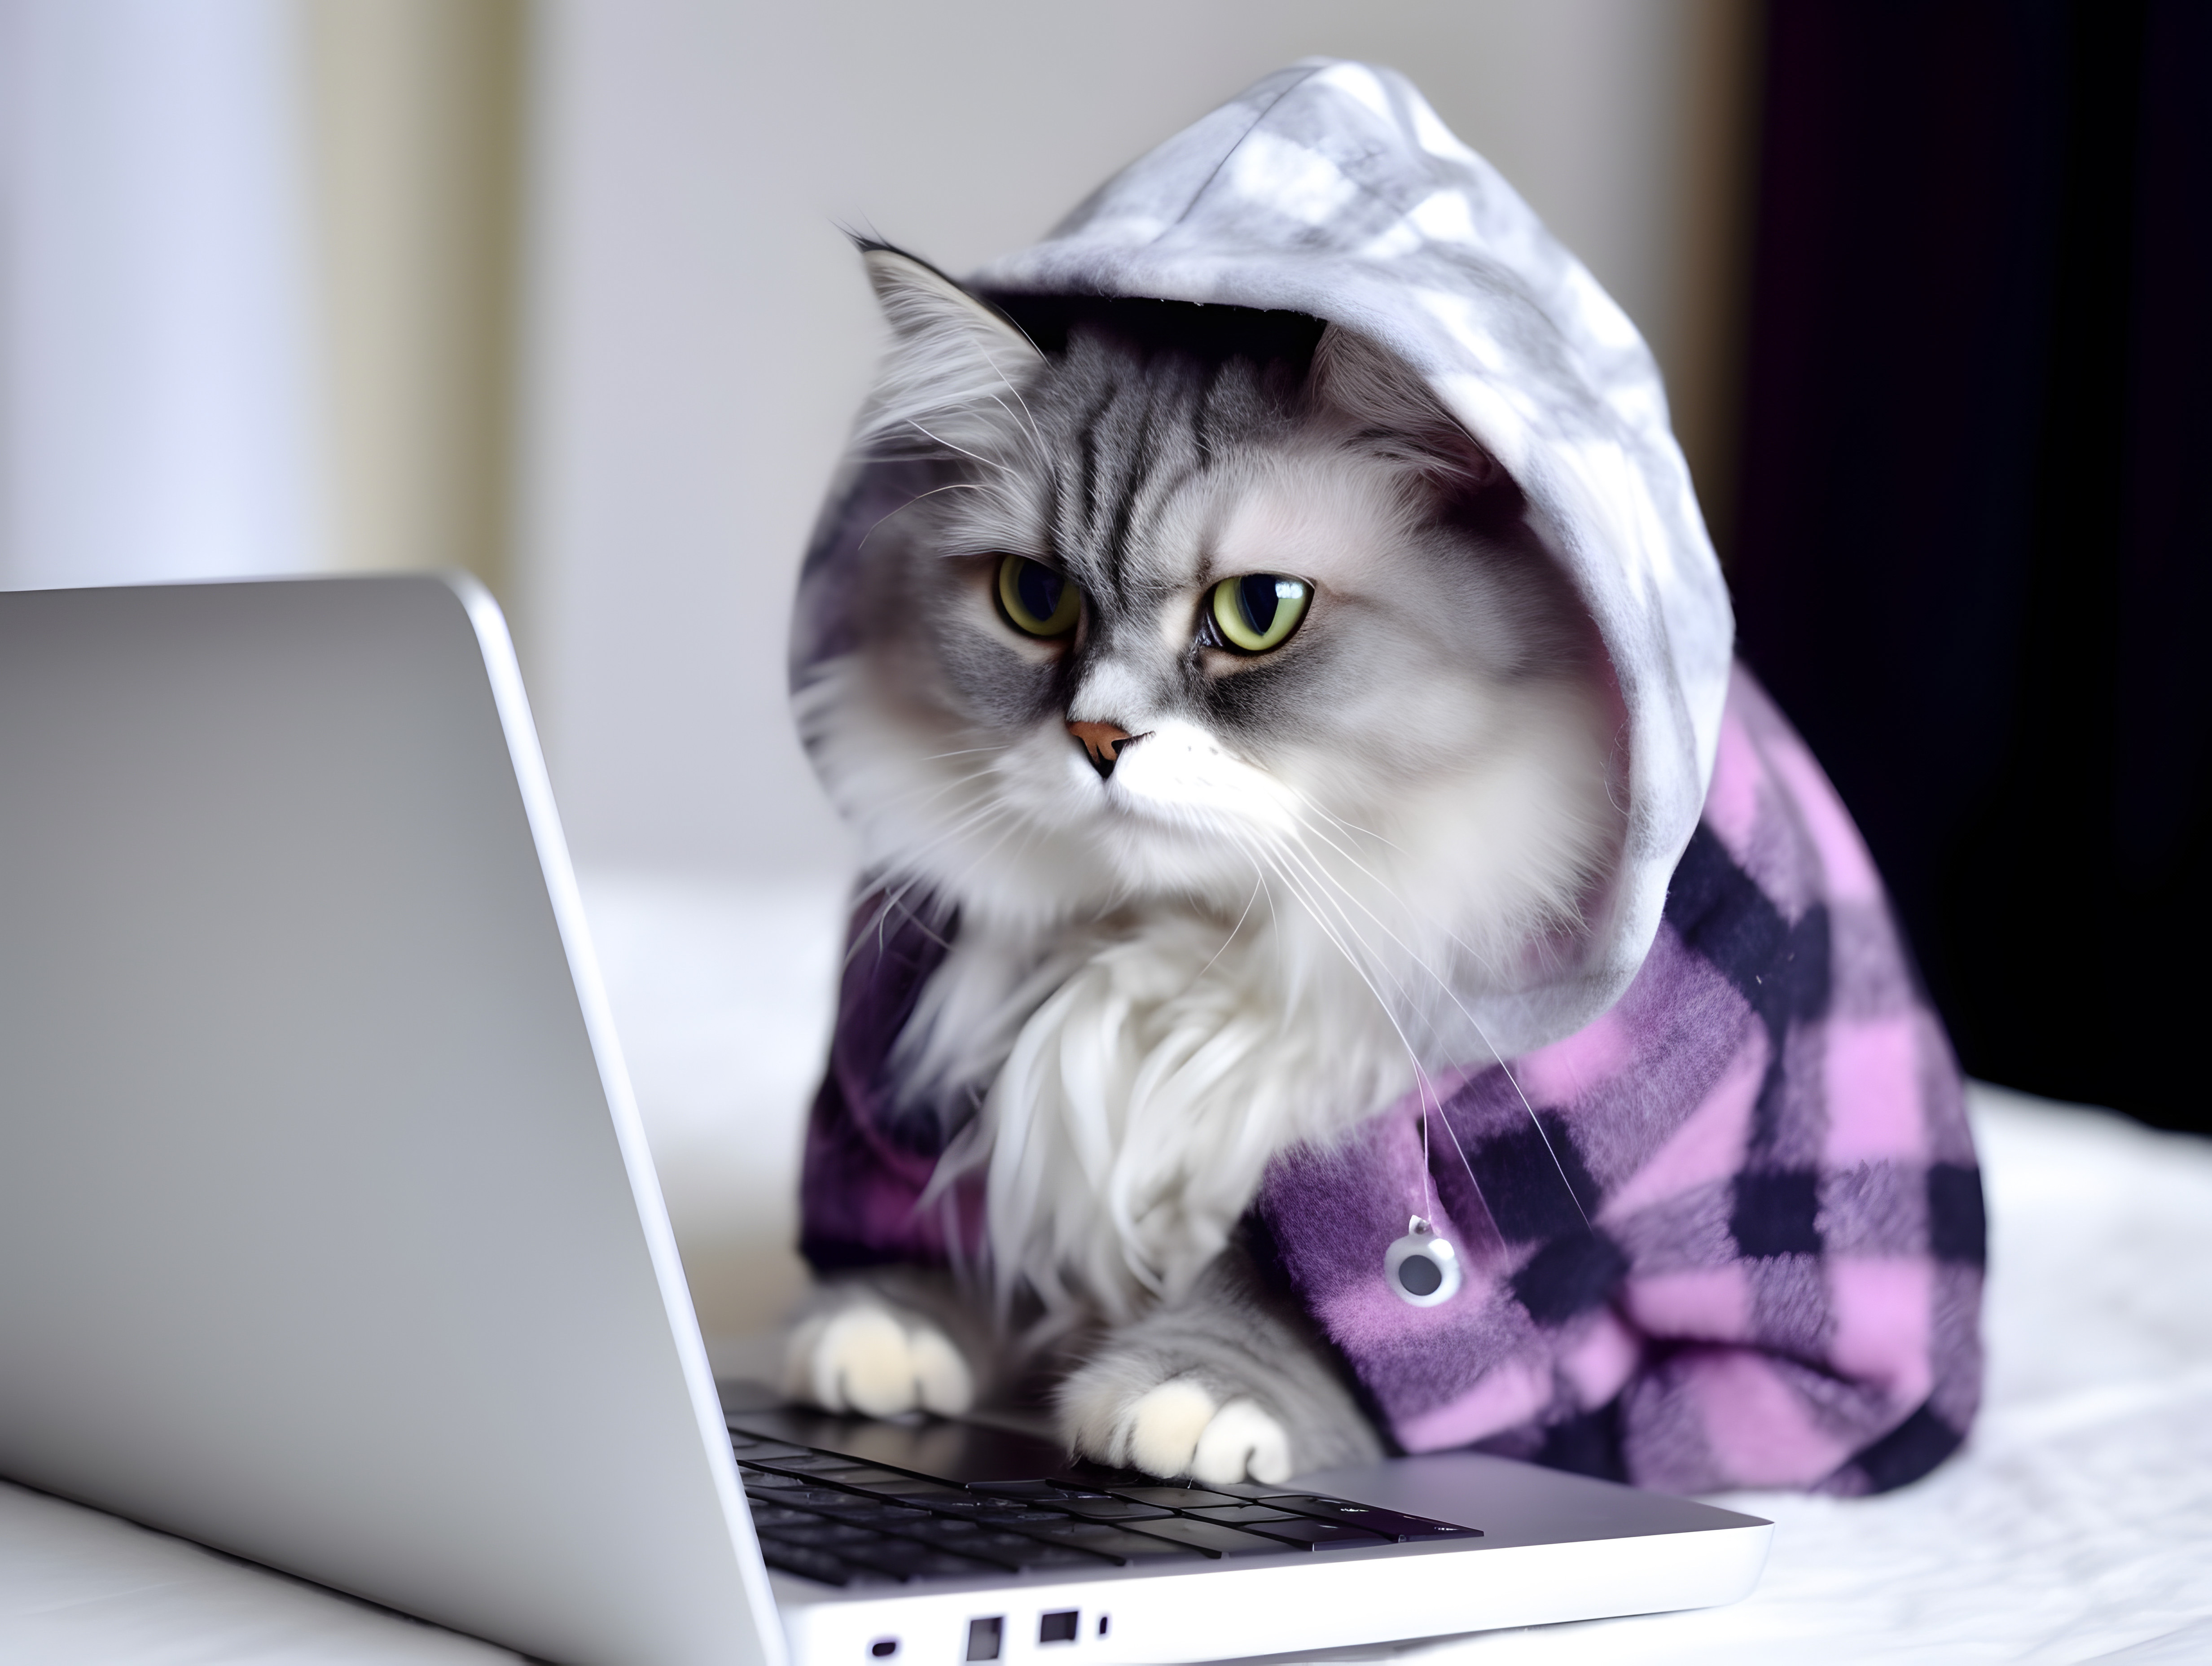 A cute cat hard at work on a laptop